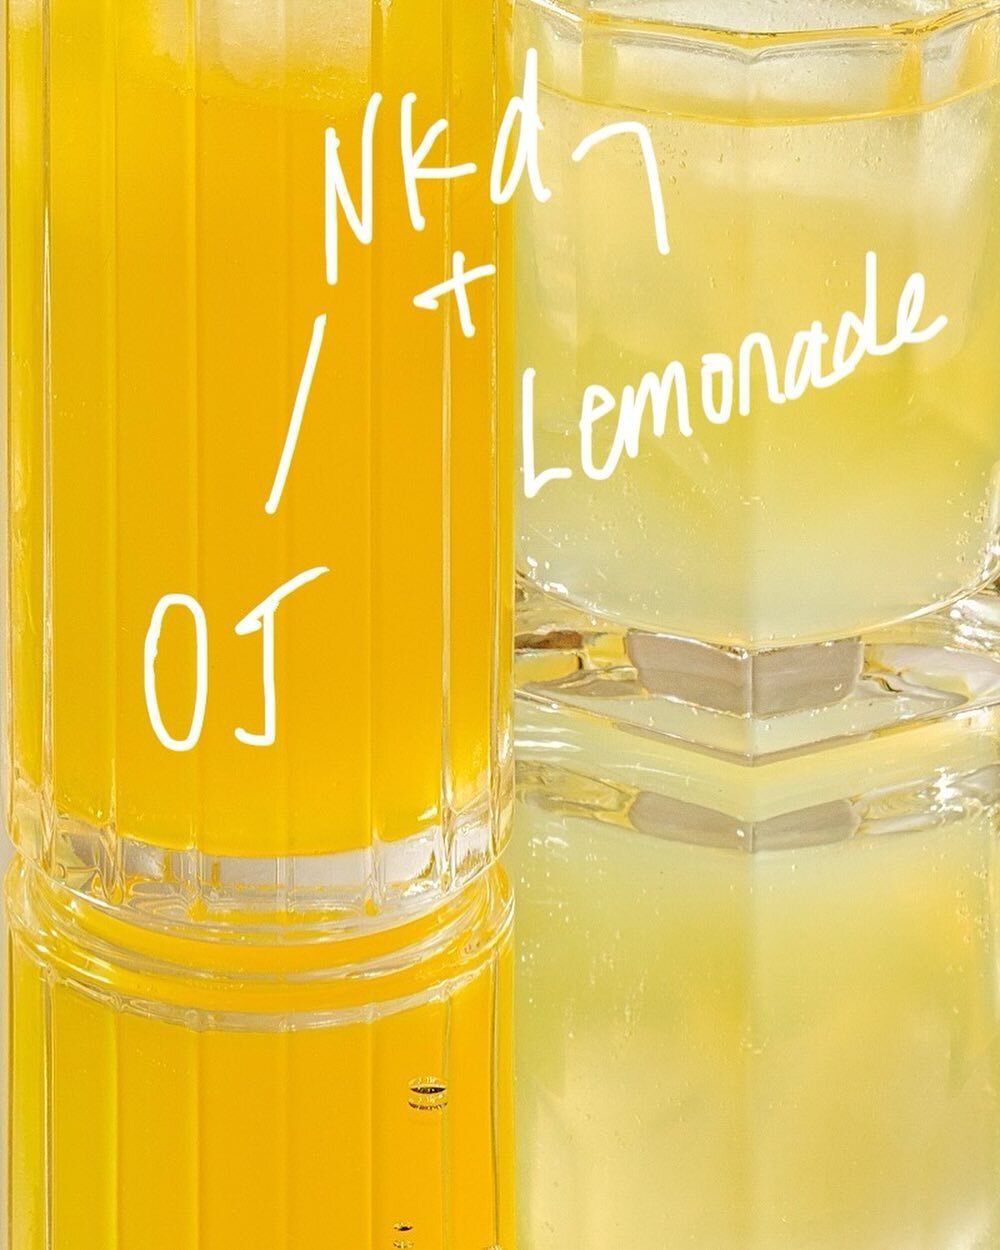 Sometimes less is more. Nkd is designed to keep it simple-just one ingredient and you're good to go. Why complicate things?

Gin + Juice
Tequila + Lemonade 

Done. 

...
#nonalcoholicspirits #mocktails #cocktails #ginandjuice #tequila #gin #sobercuri